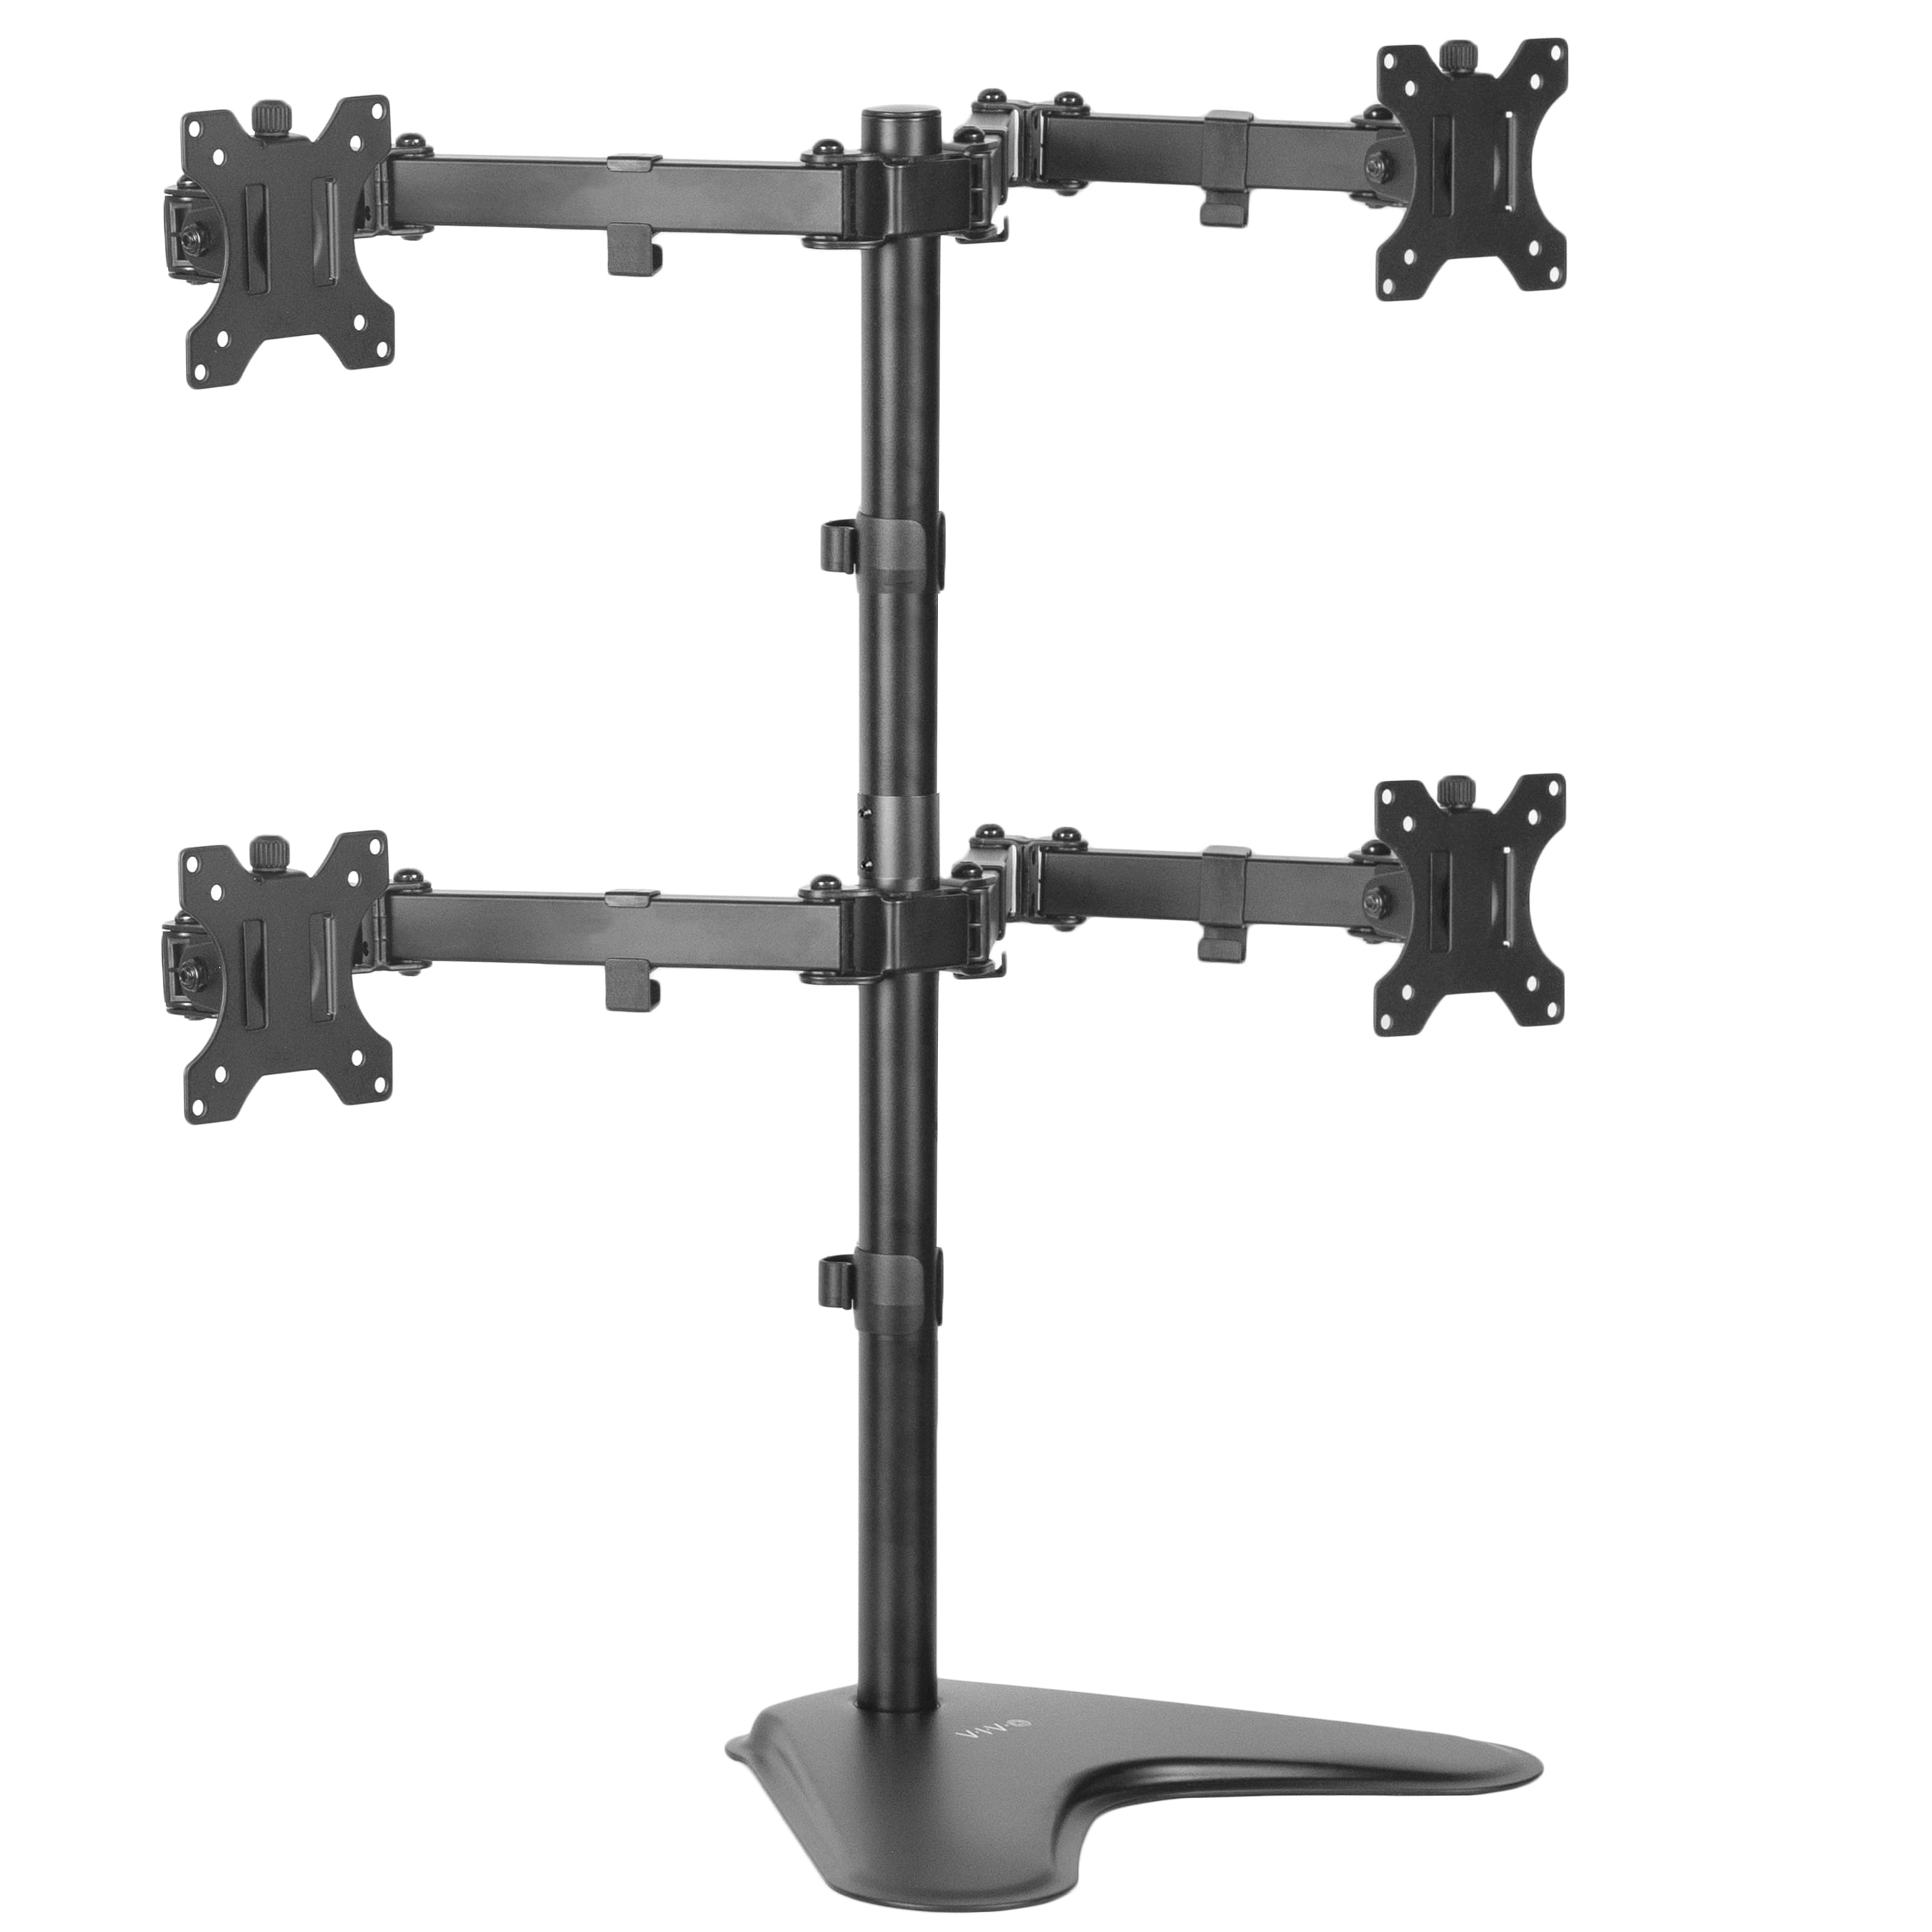 Mount-It! MI-781 - Stand - adjustable arm - for 2 monitors - heavy 